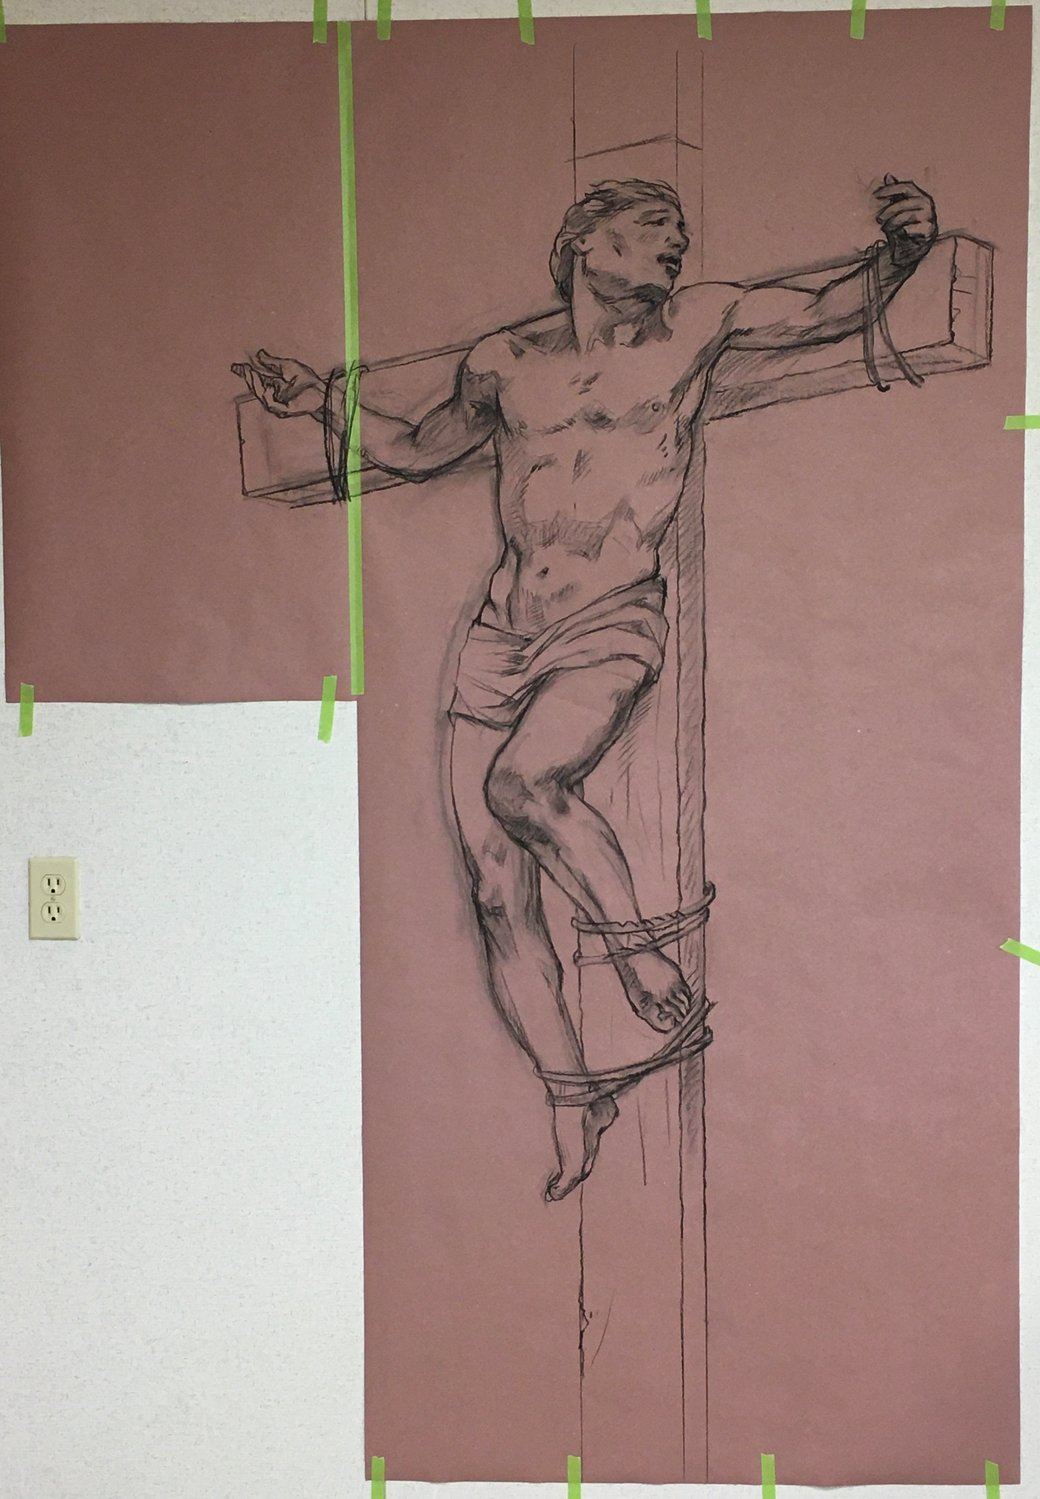 These full-size charcoal renderings by Stoyko Stoykov preceded the painting of the mural.